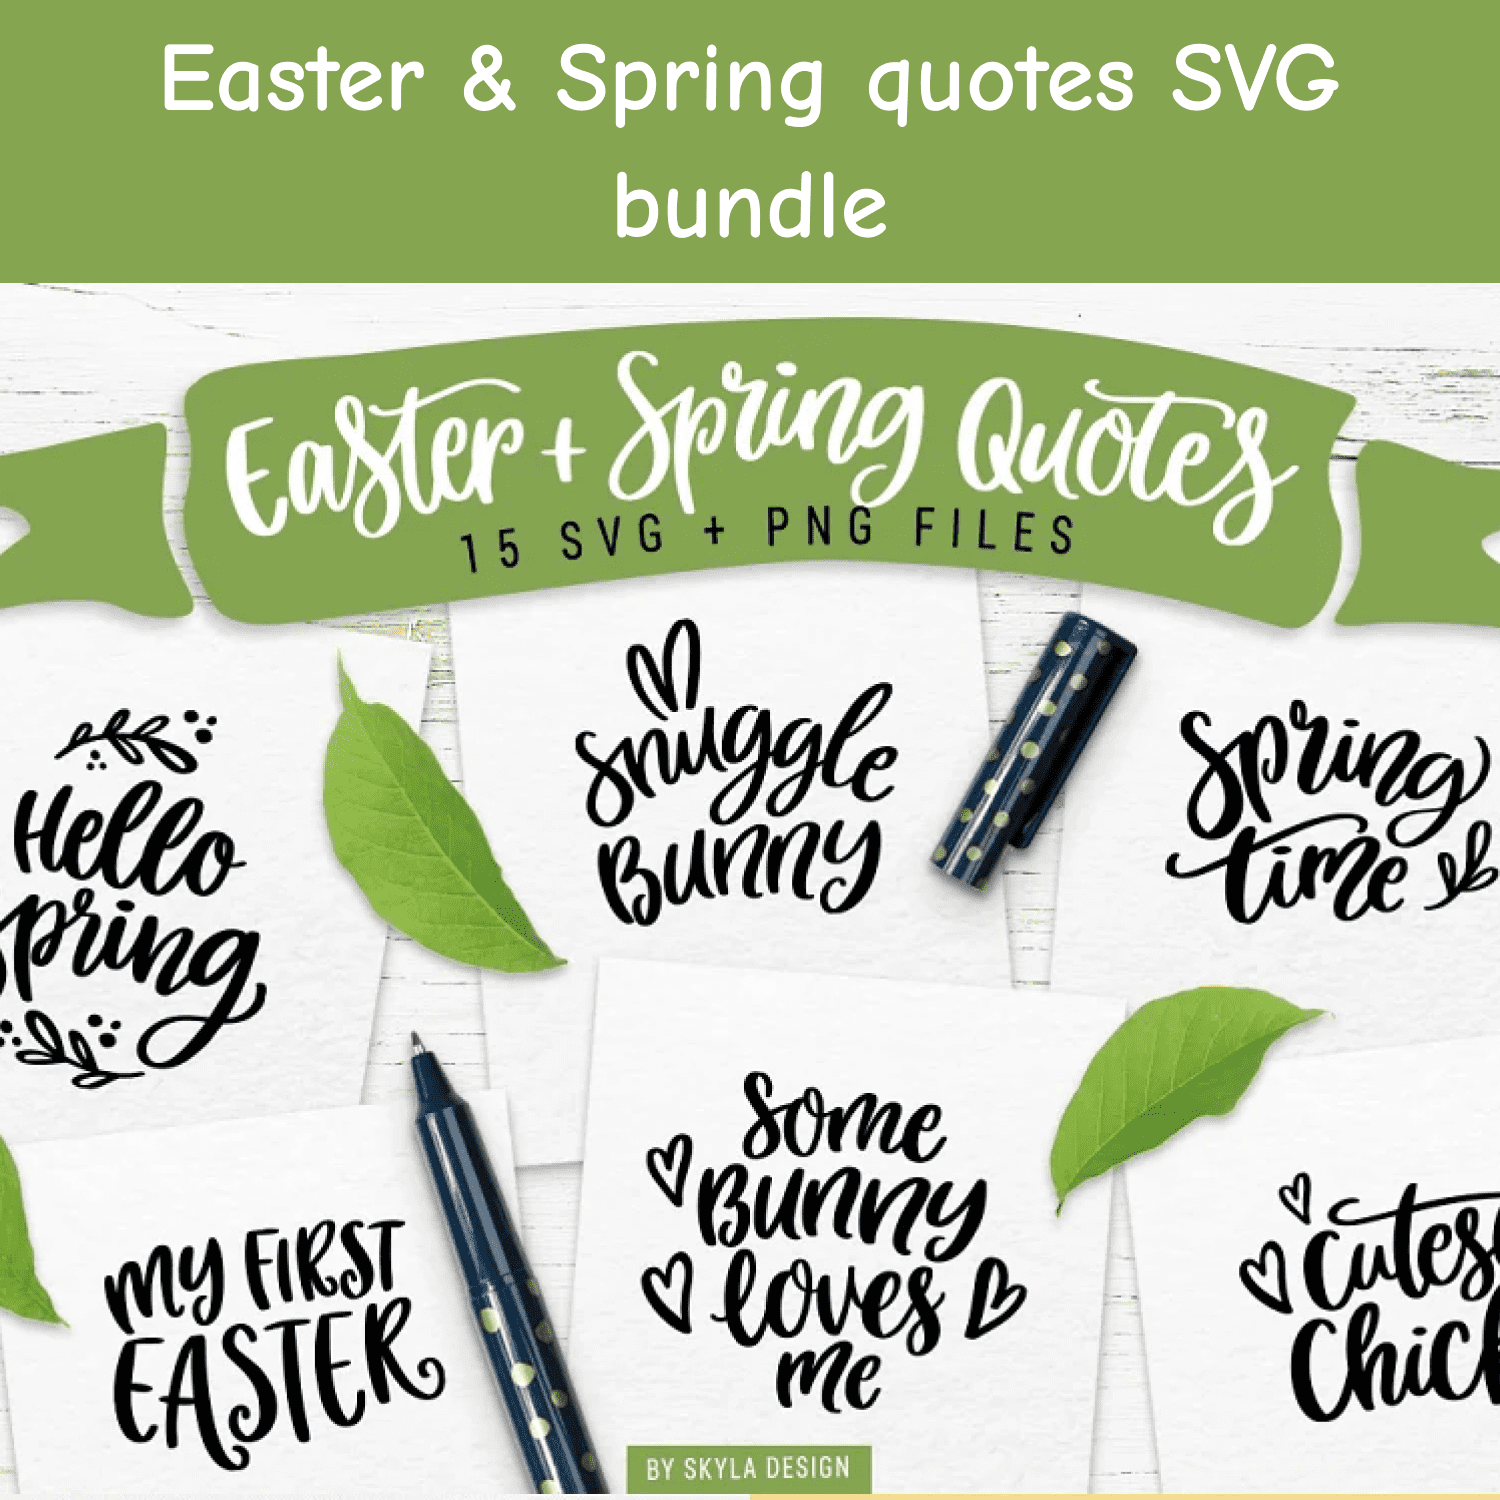 Easter & Spring quotes SVG bundle cover.